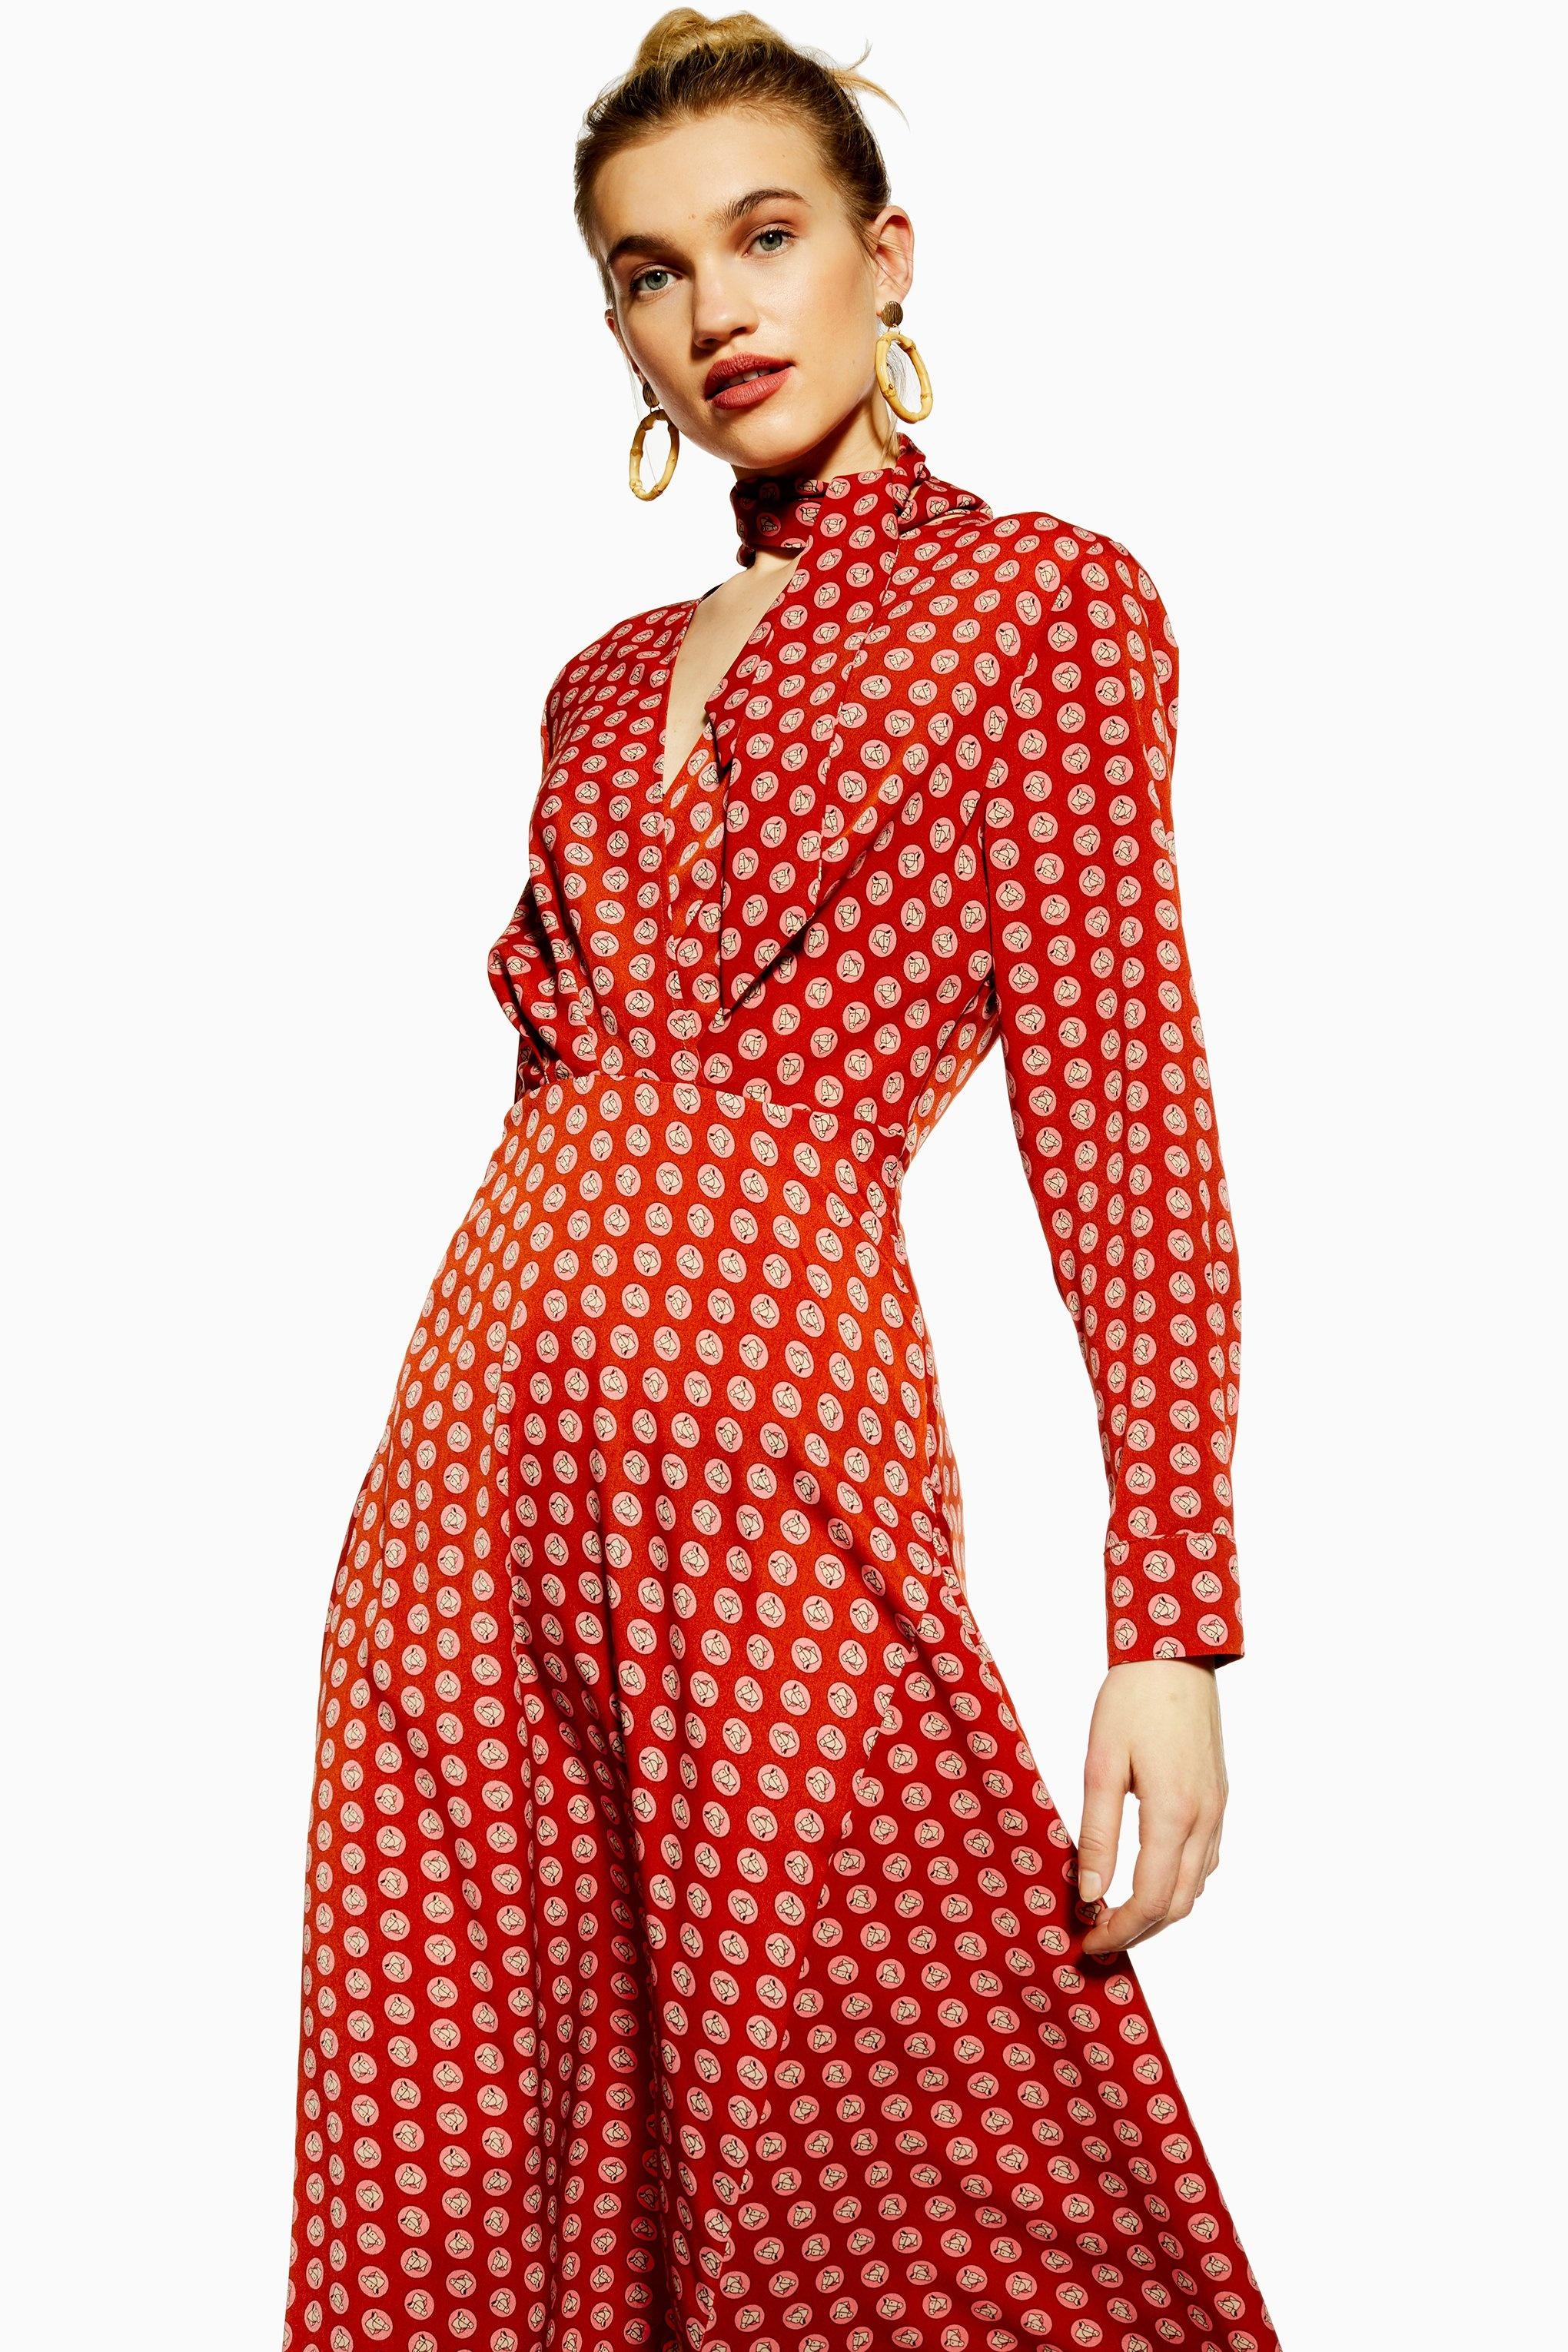 Topshop Horse Coin Midi Dress Outlet Sale, UP TO 66% OFF | www.ldeventos.com